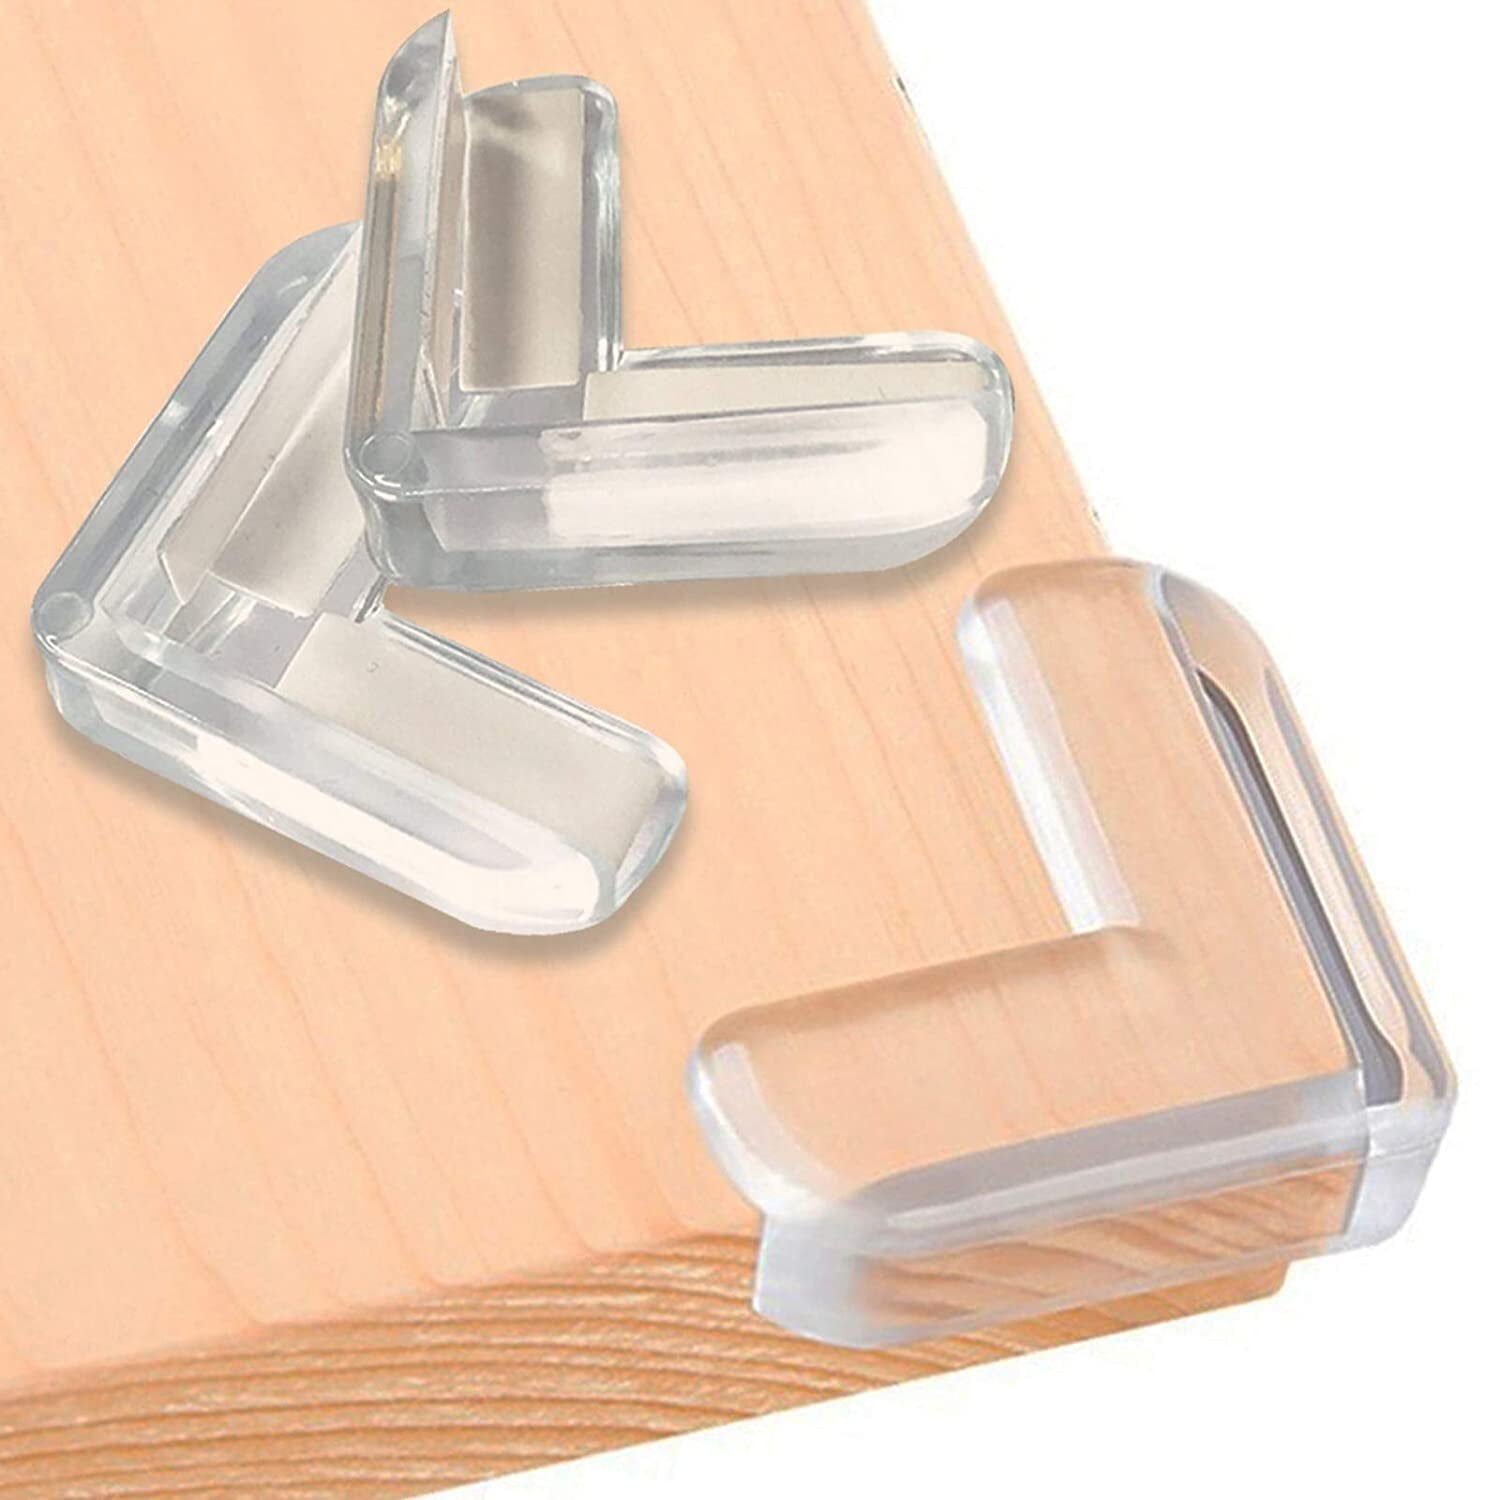 Buy V Shape Baby Safety Protection table Corner 1 pcs at Rs. 5